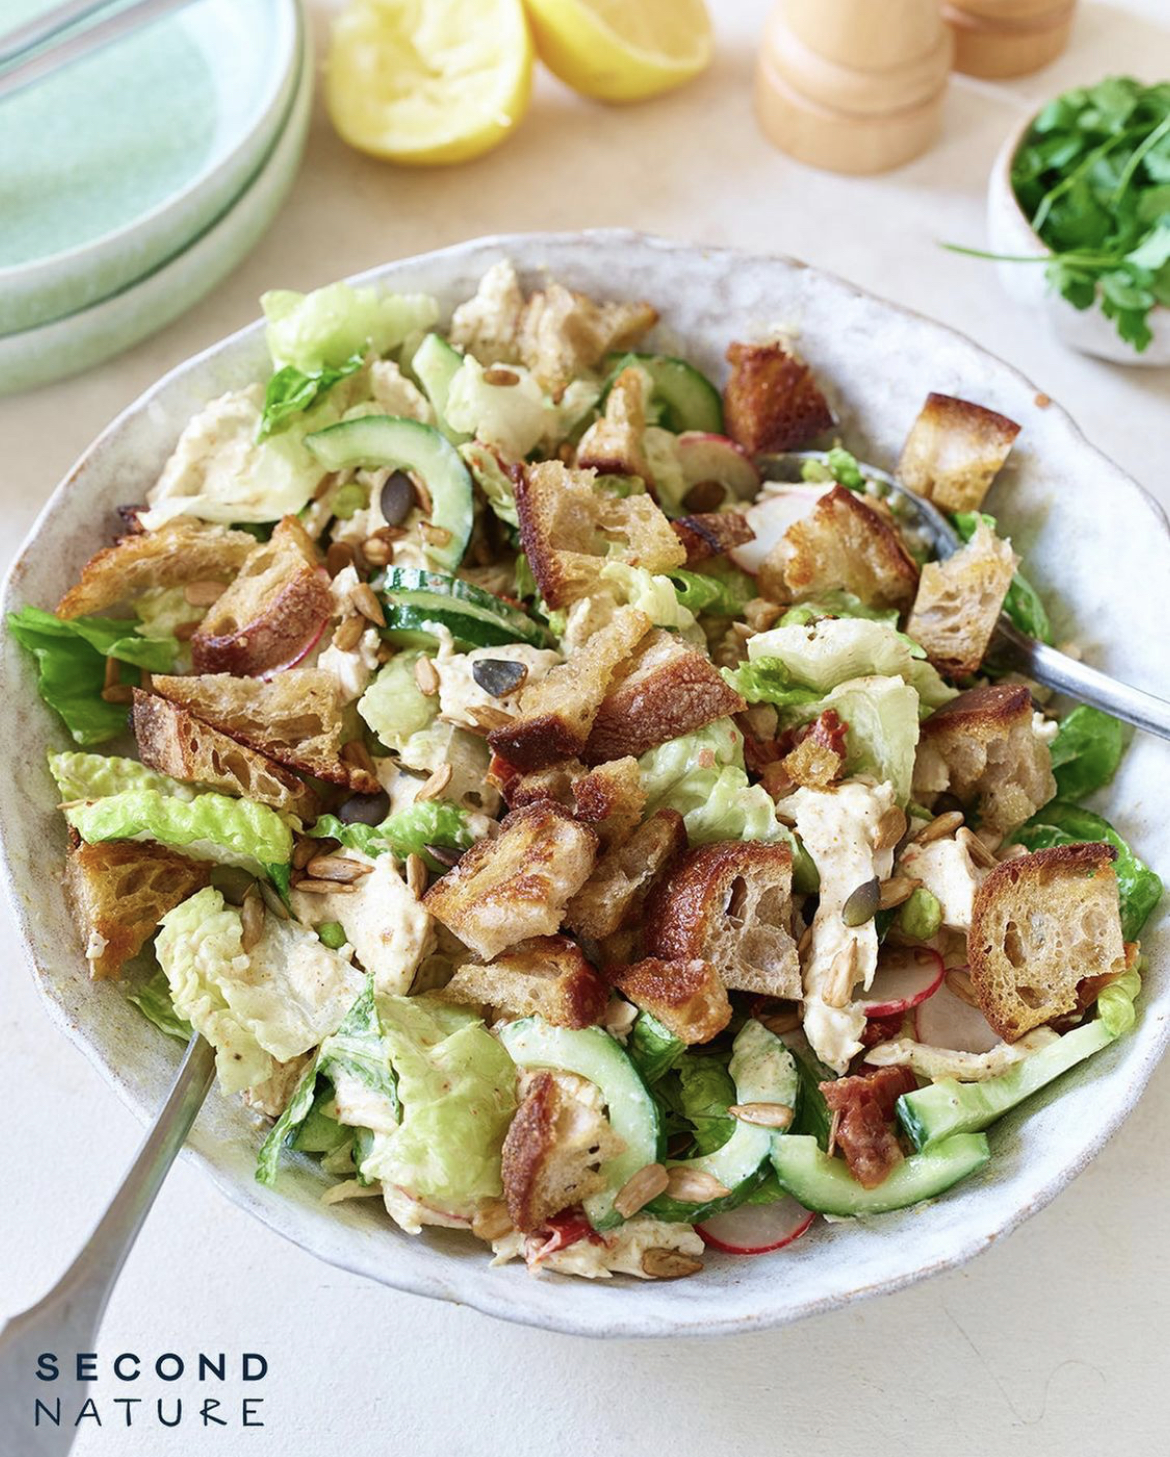 A chicken salad with lettuce, croutons and a coronation dressing